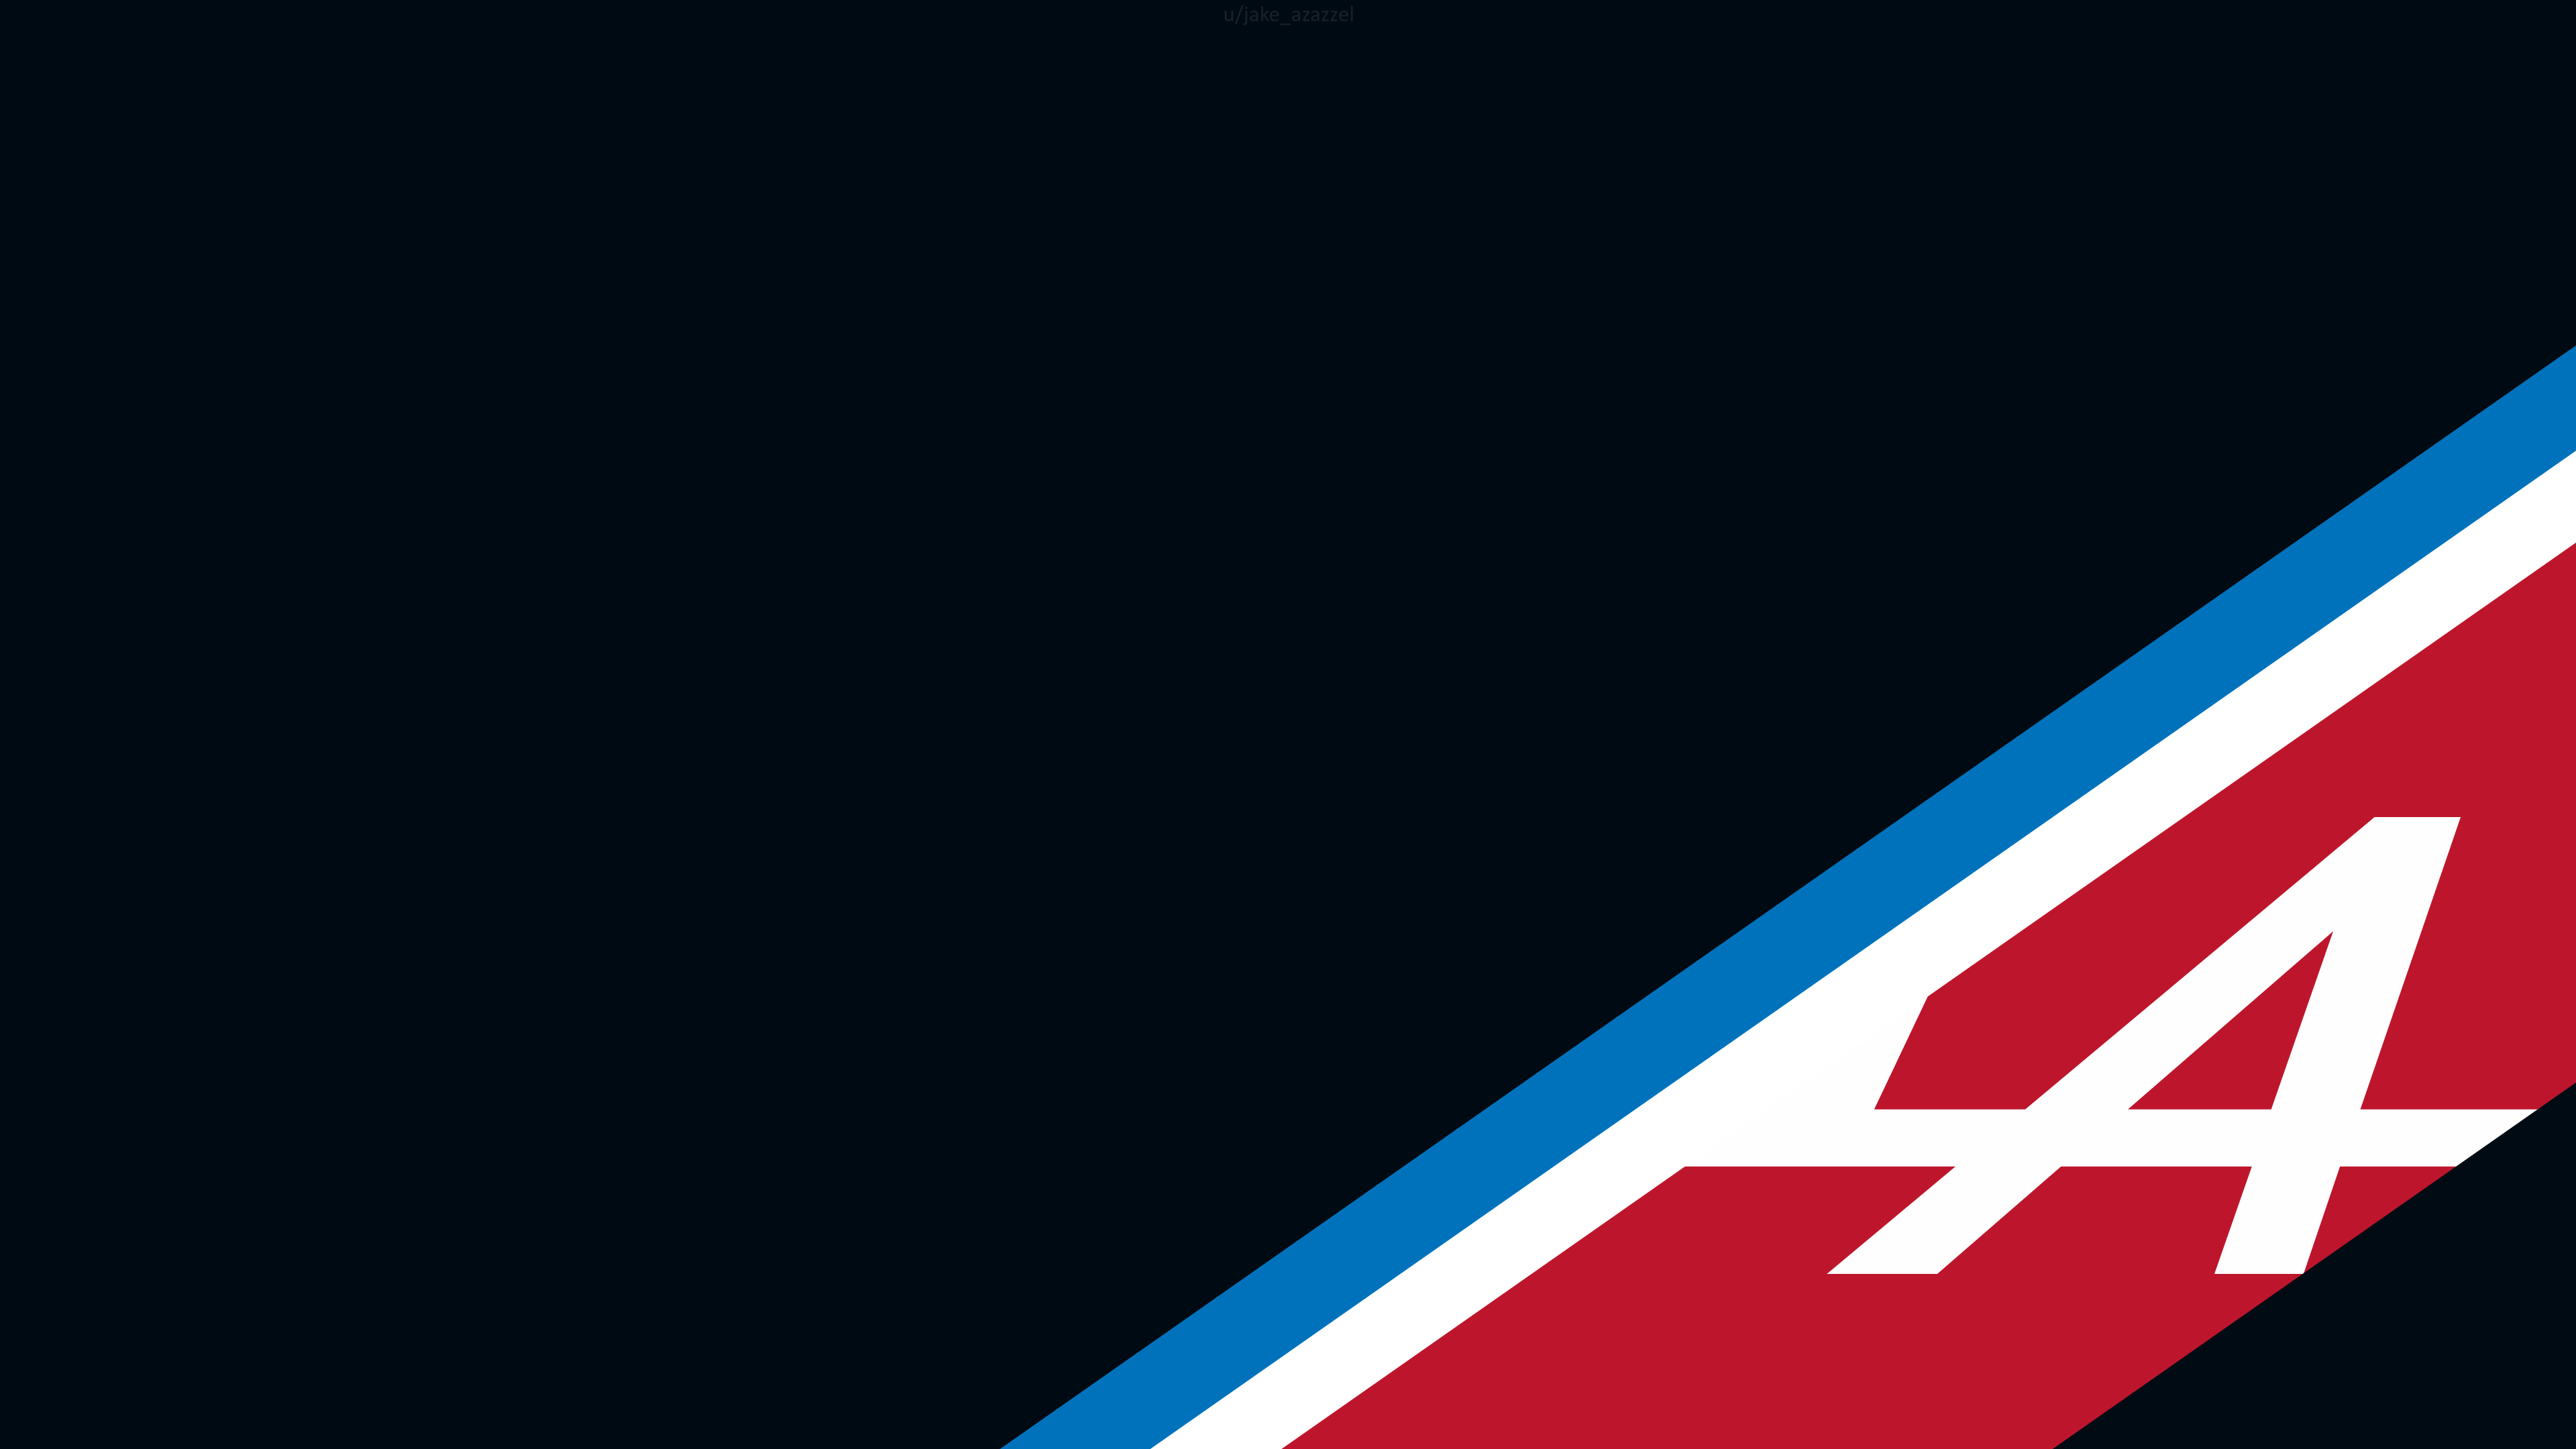 Minimalistic Wallpaper of Alpine F1 Team's winter livery 4k (made by me)